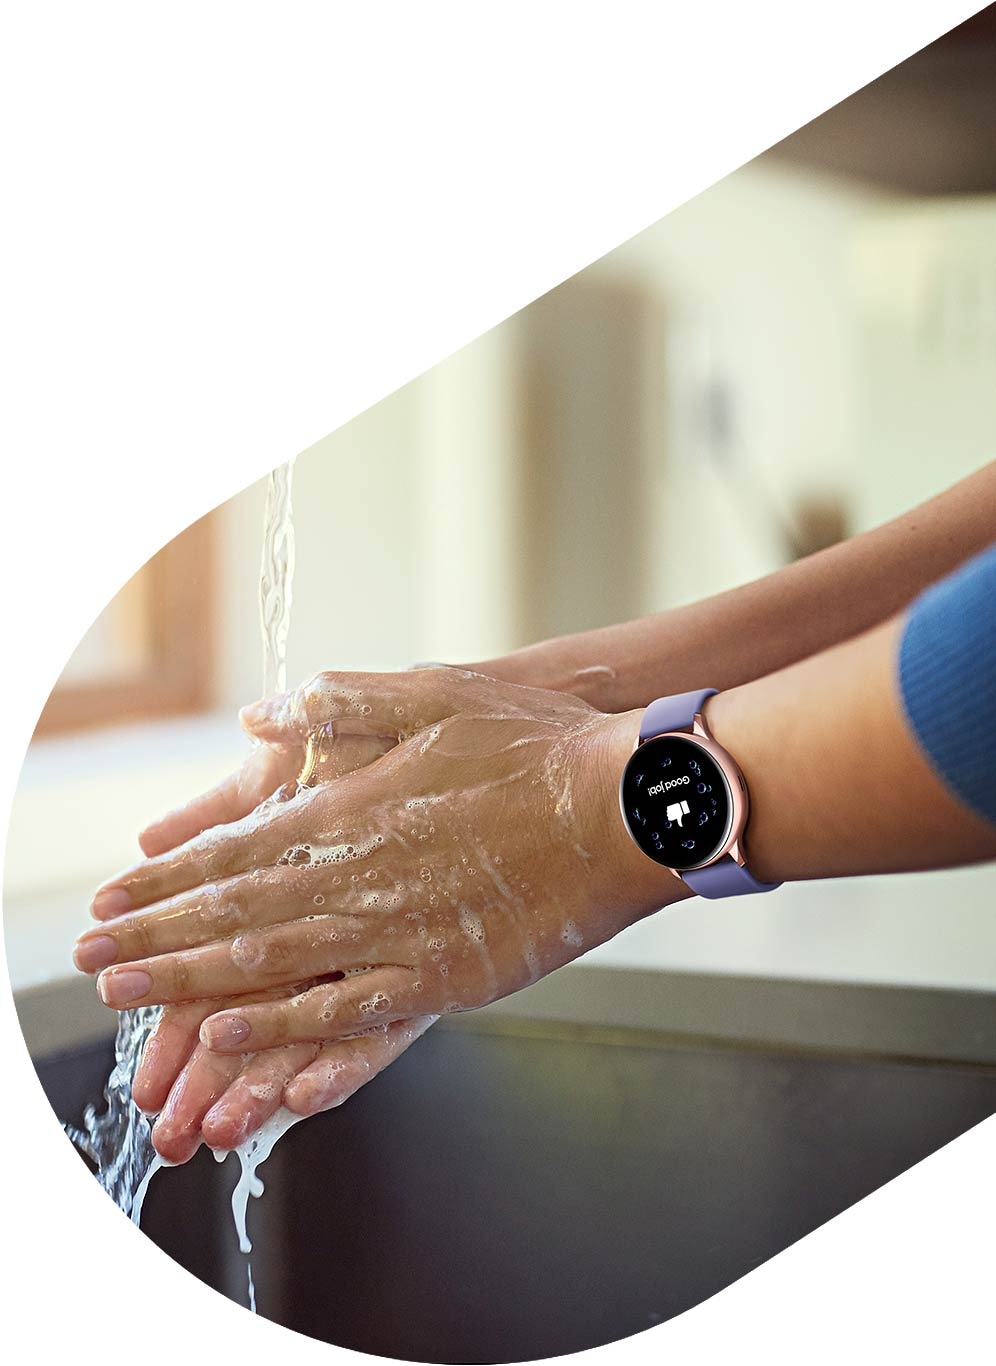 Latest Offer Galaxy Watch Active2 40mm Samsung Singapore